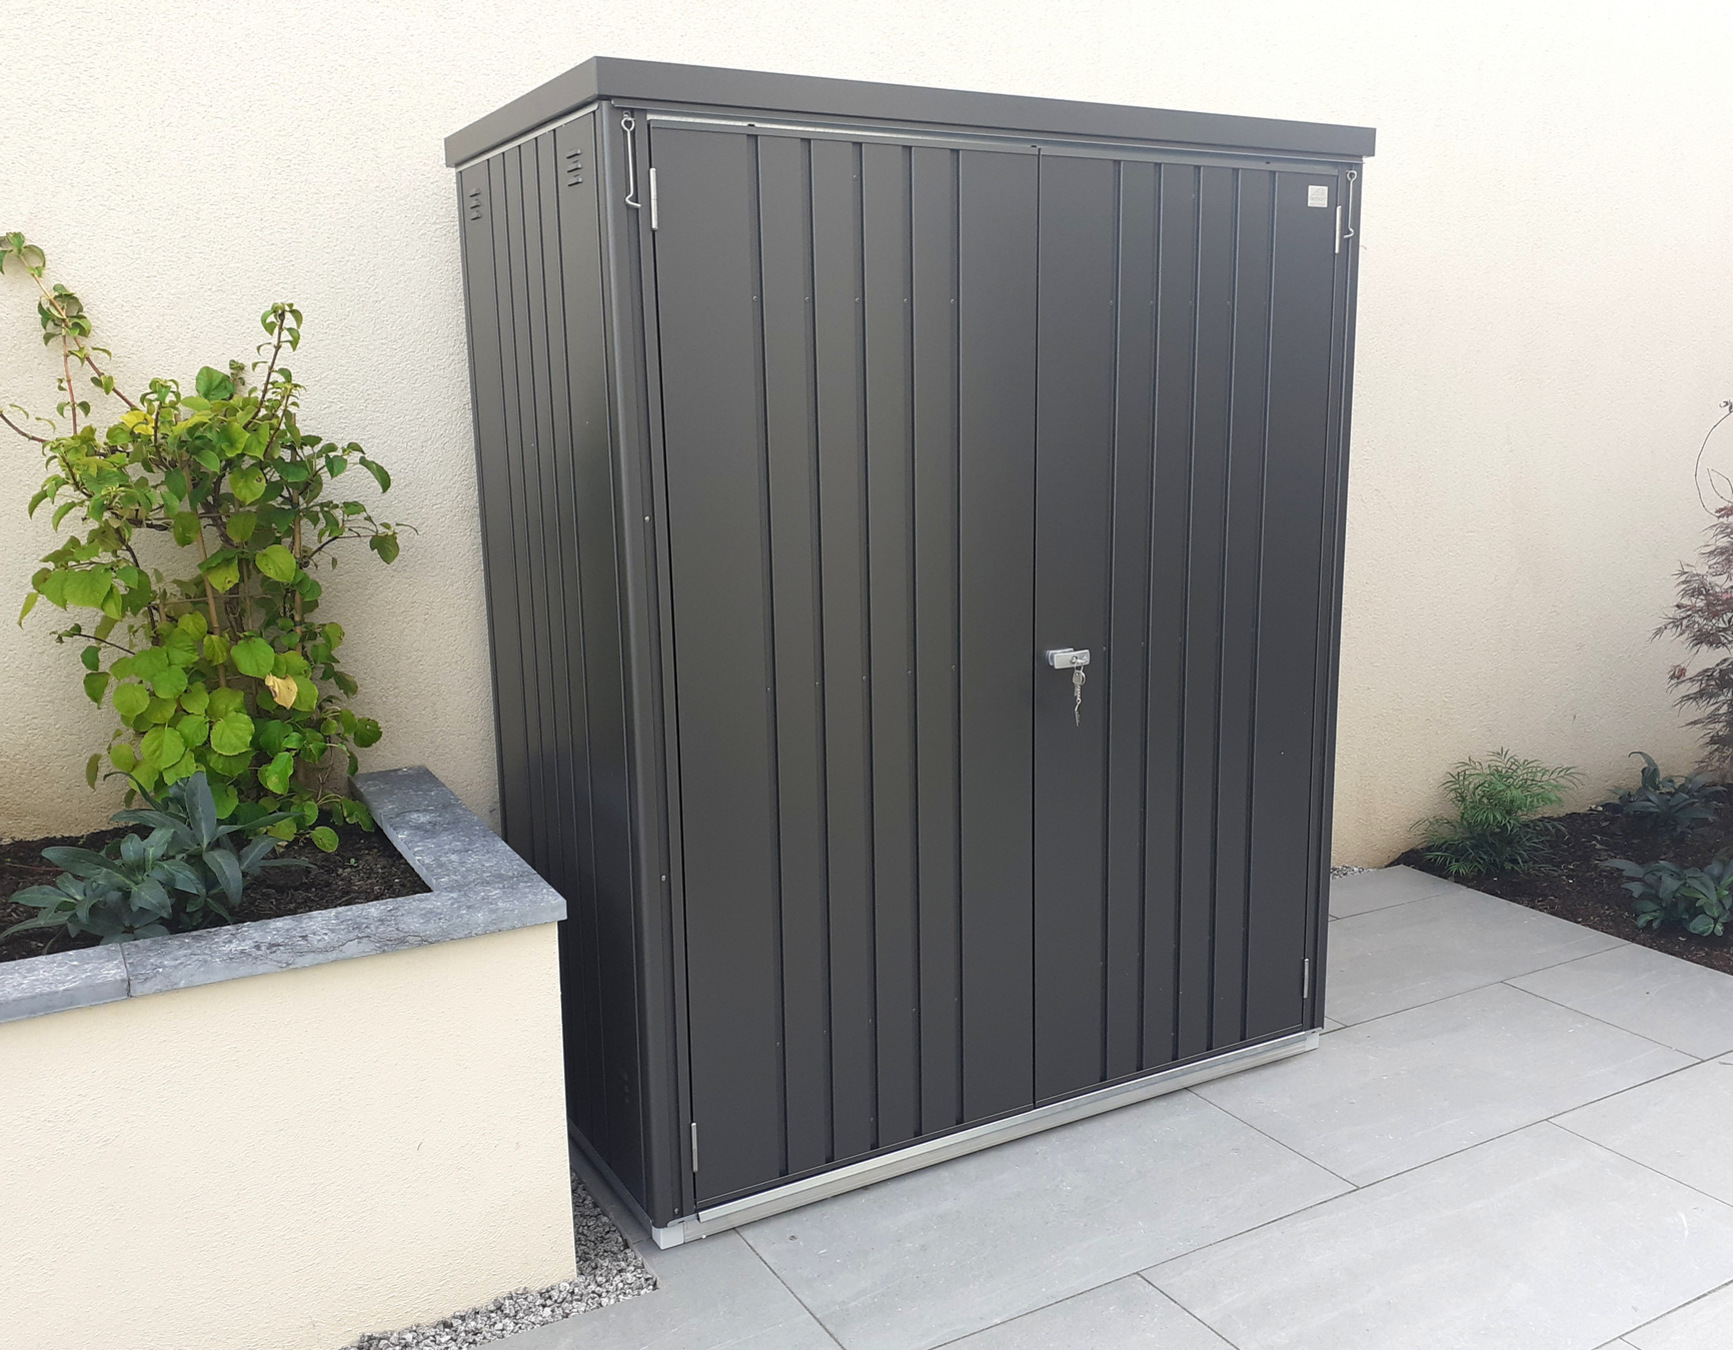 The superb quality and style of the Biohort Equipment Locker 150 in metallic dark grey  with optional accessories including aluminium floor frame, aluminium floor panels | supplied + installed in Mount Merrion, Co Dublin